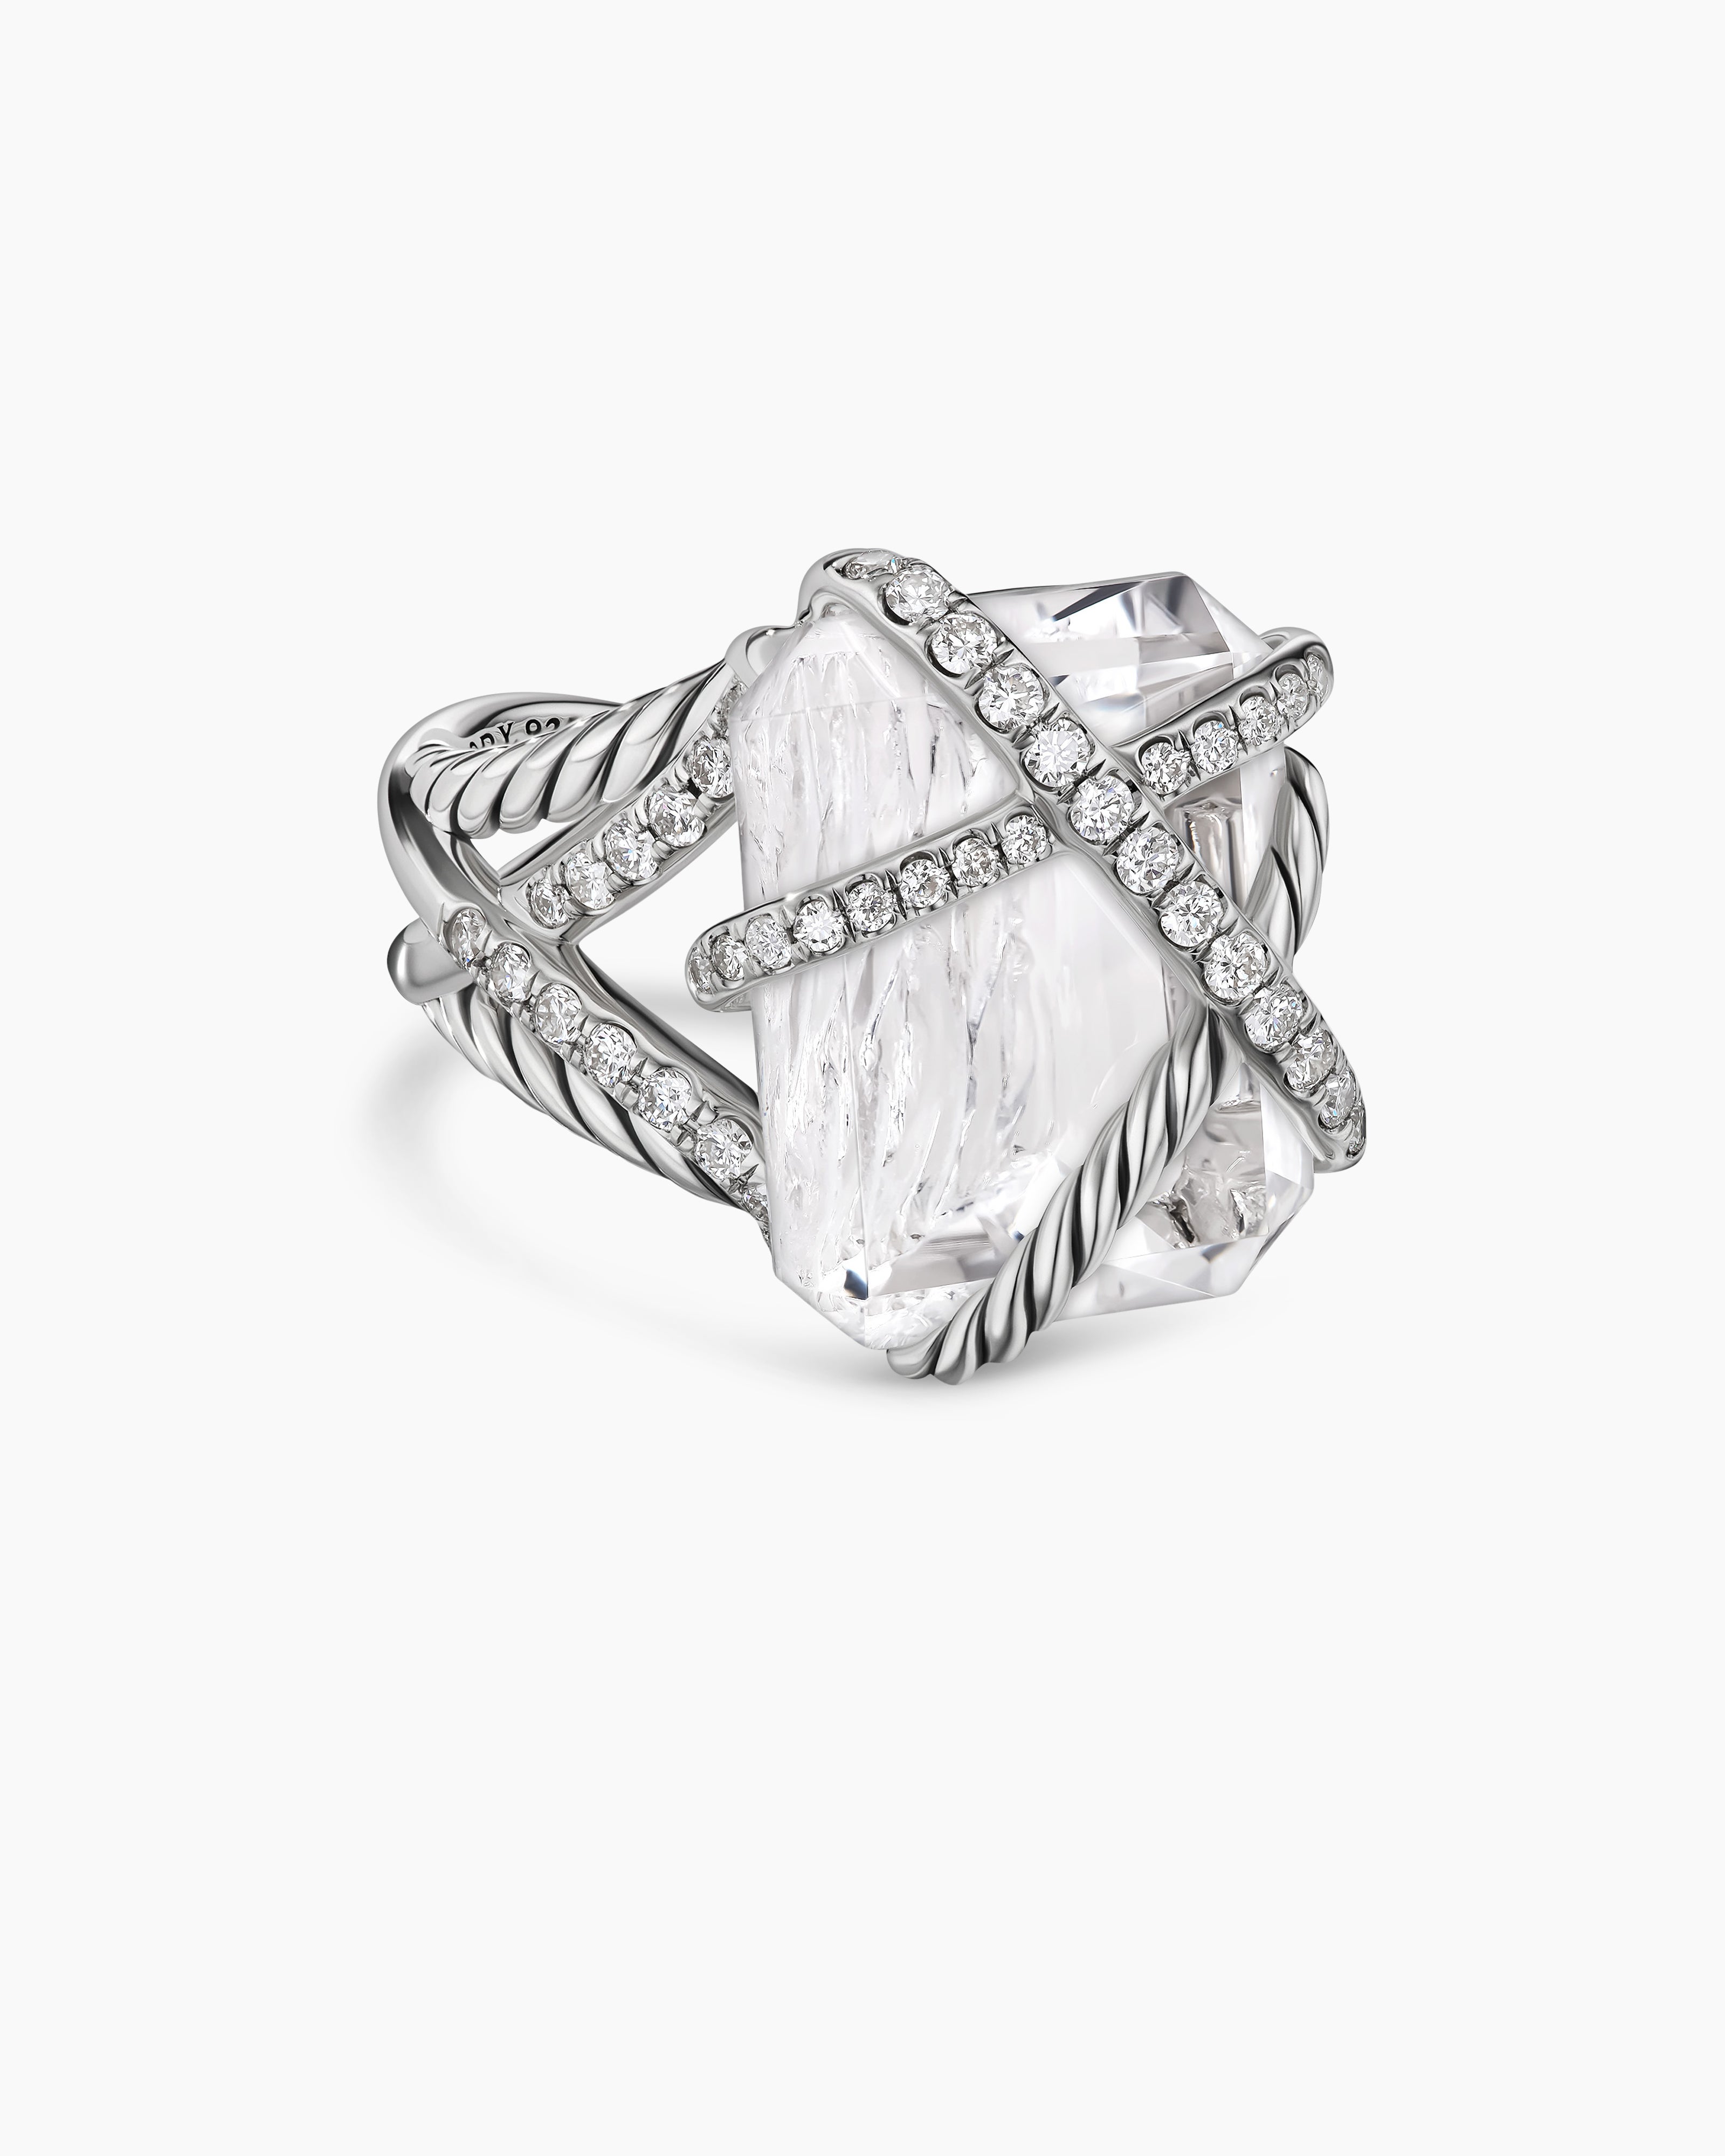 Cable Wrap Ring in Sterling Silver with Diamonds, 18mm